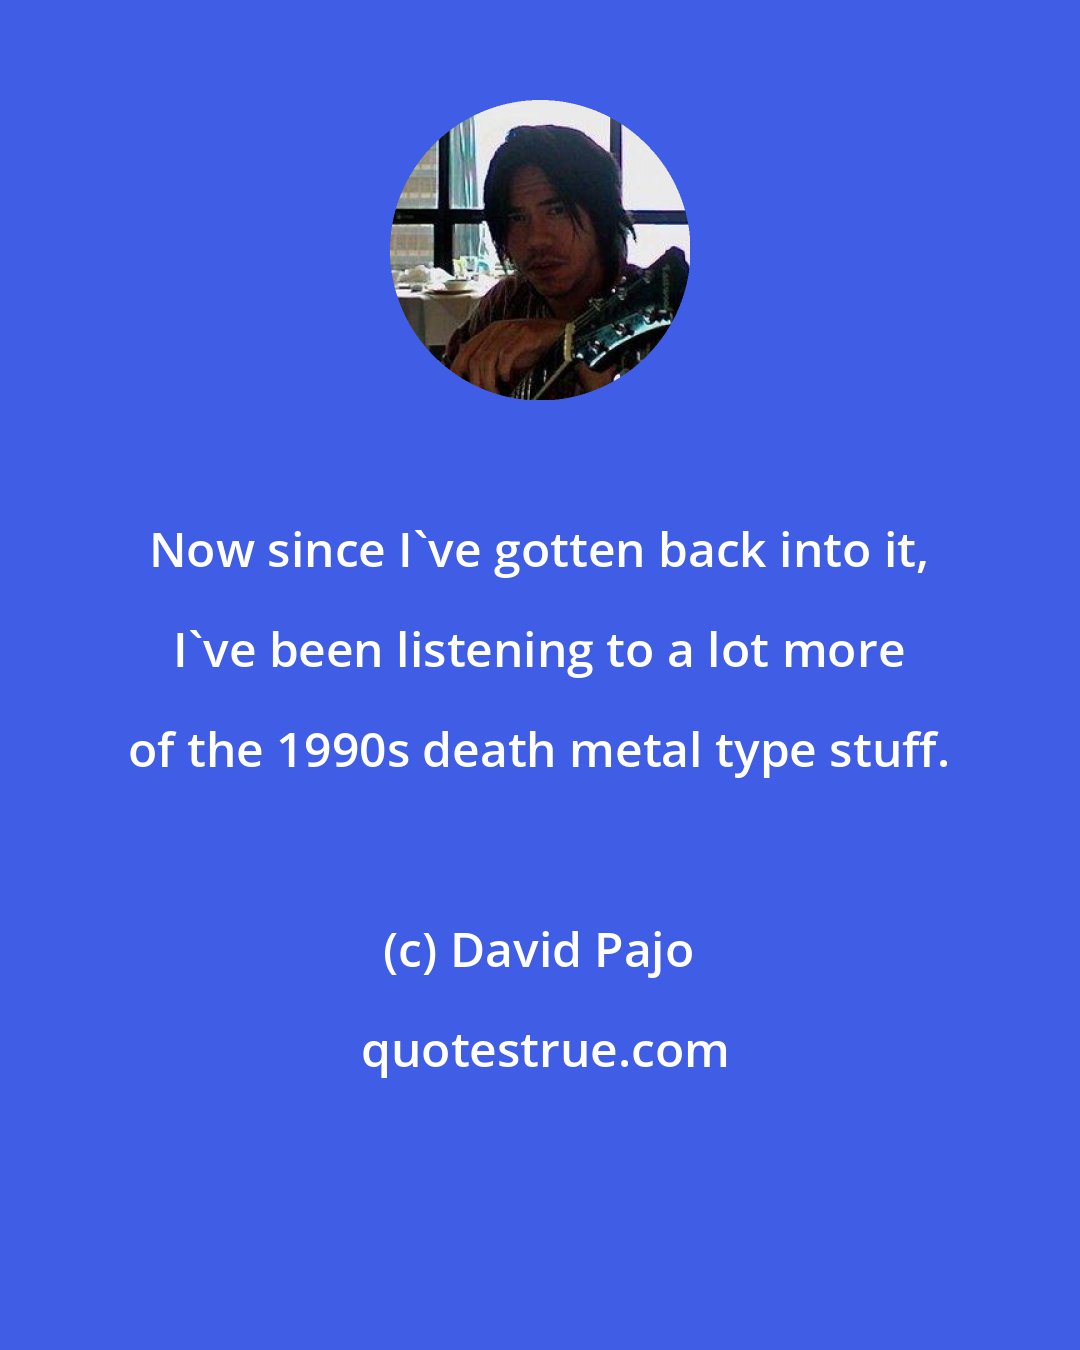 David Pajo: Now since I've gotten back into it, I've been listening to a lot more of the 1990s death metal type stuff.